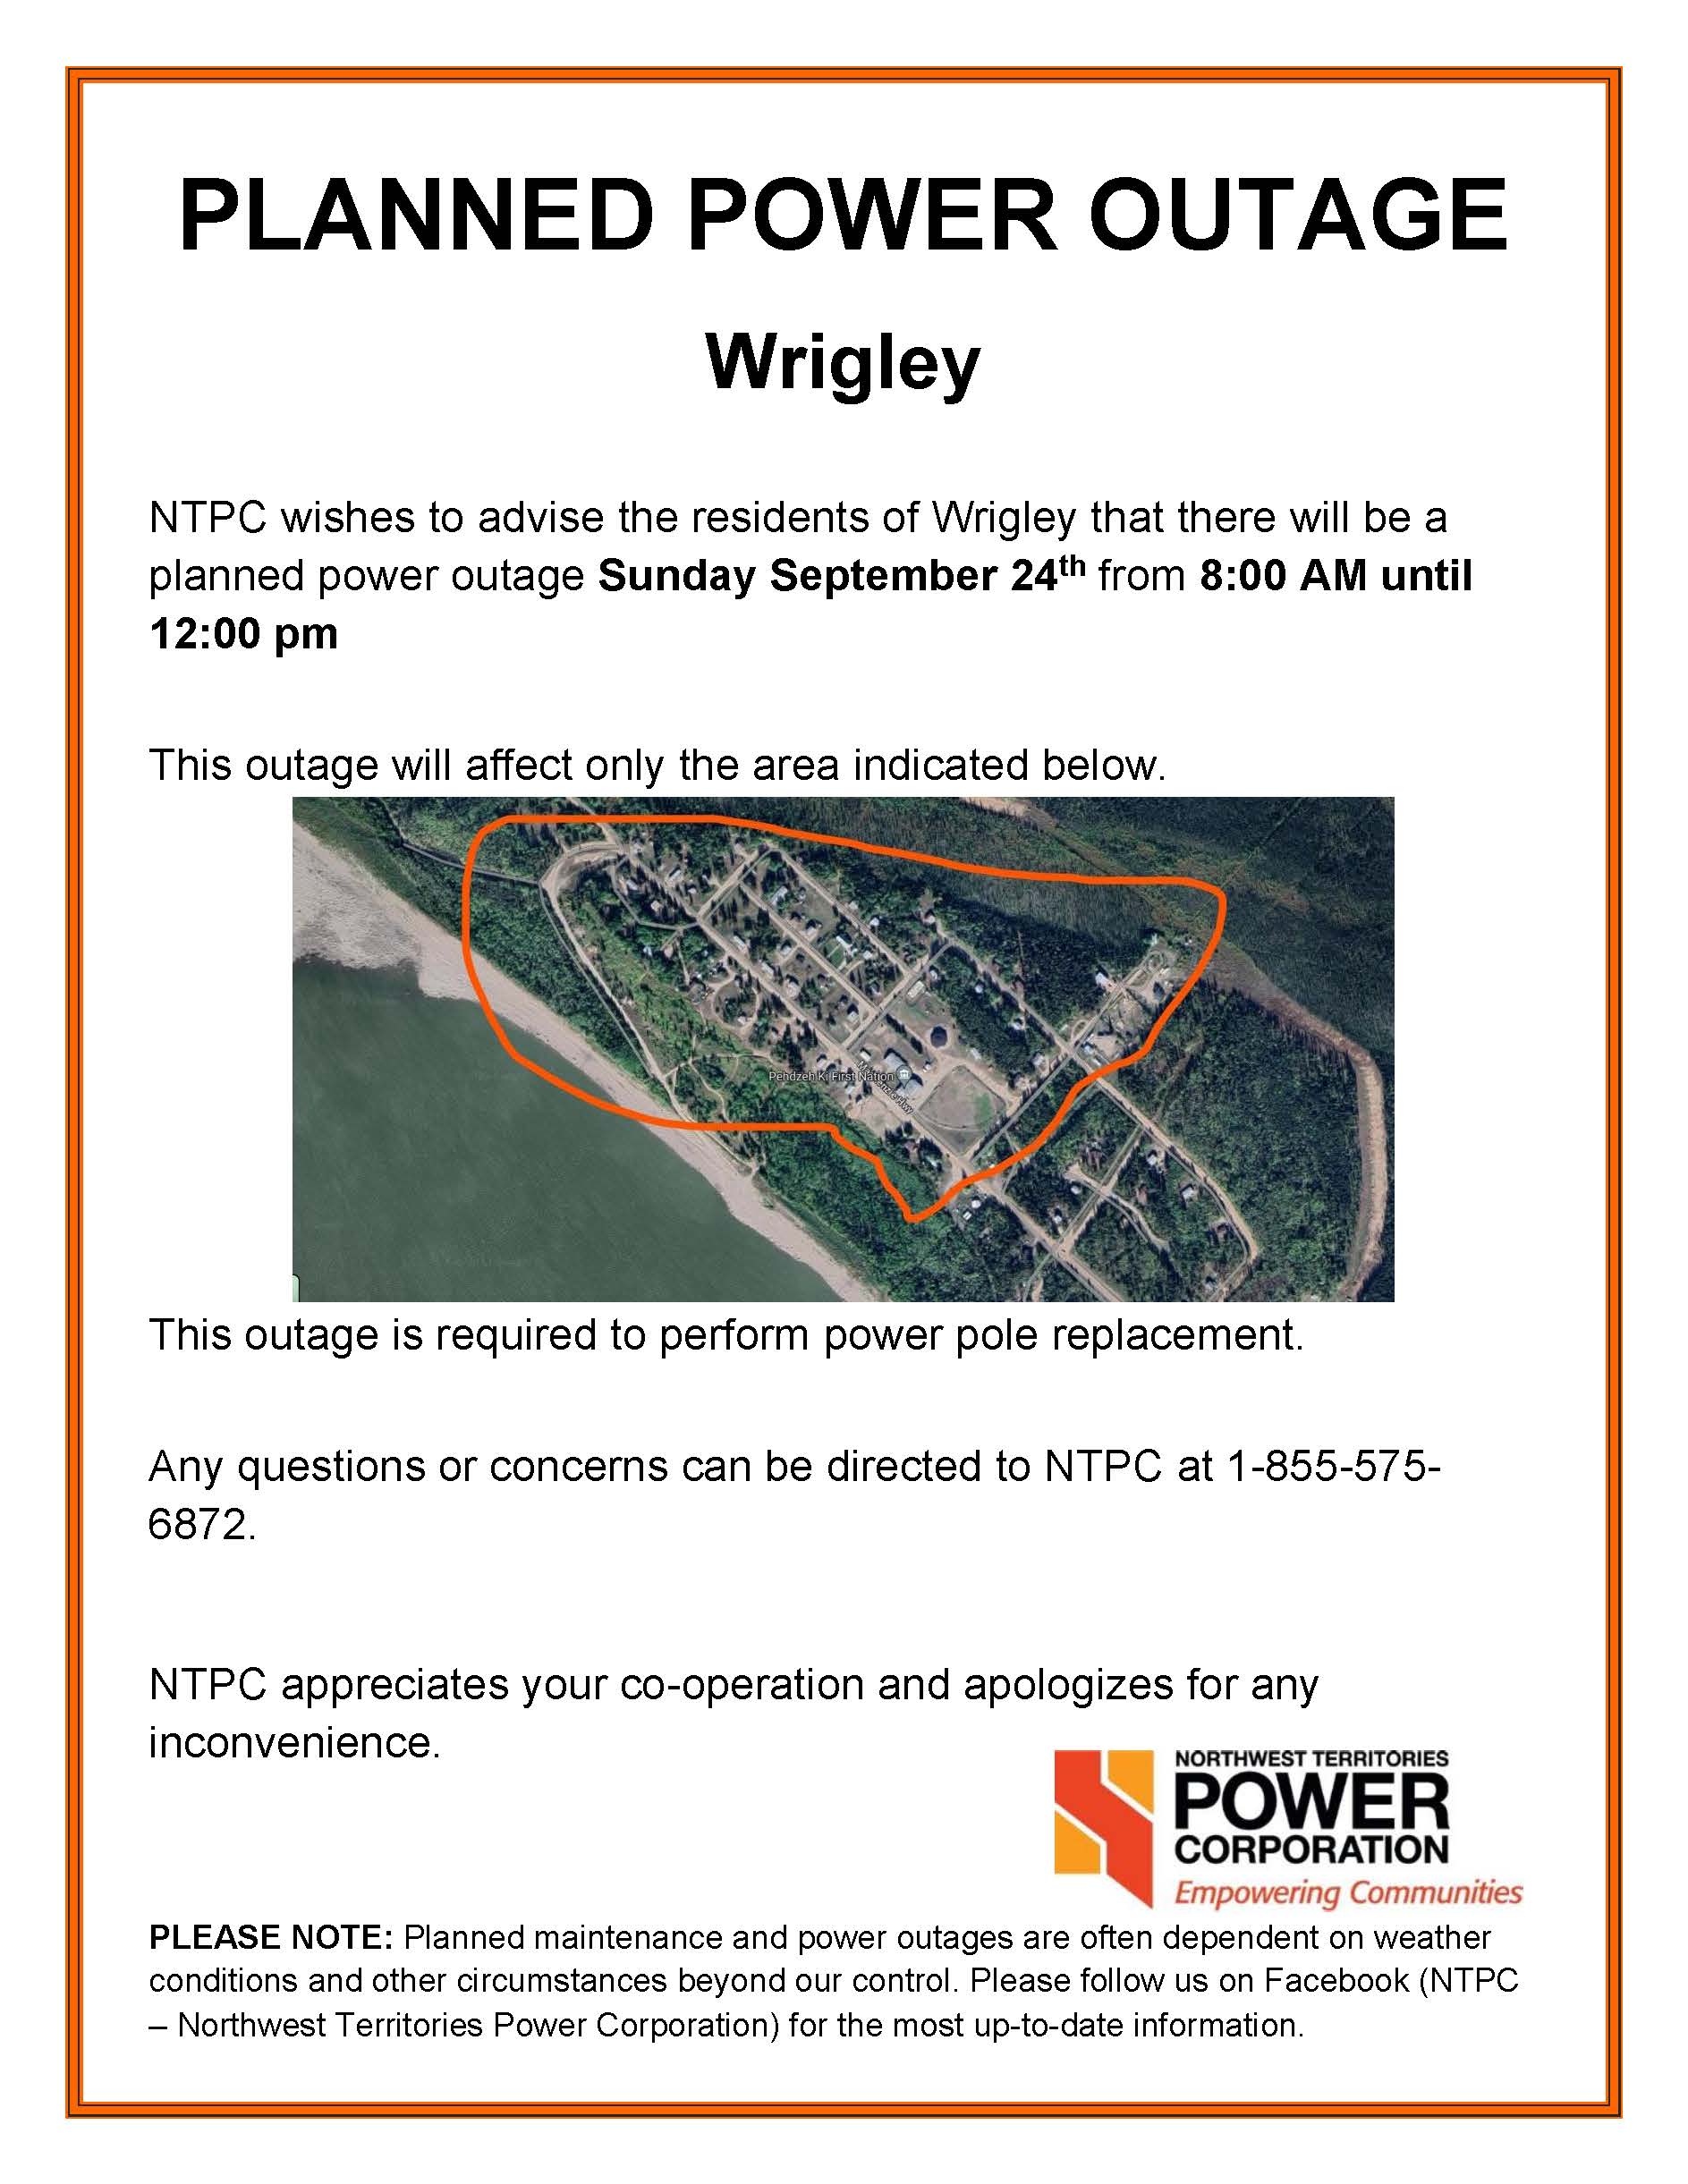 Planned Outage Wrigley